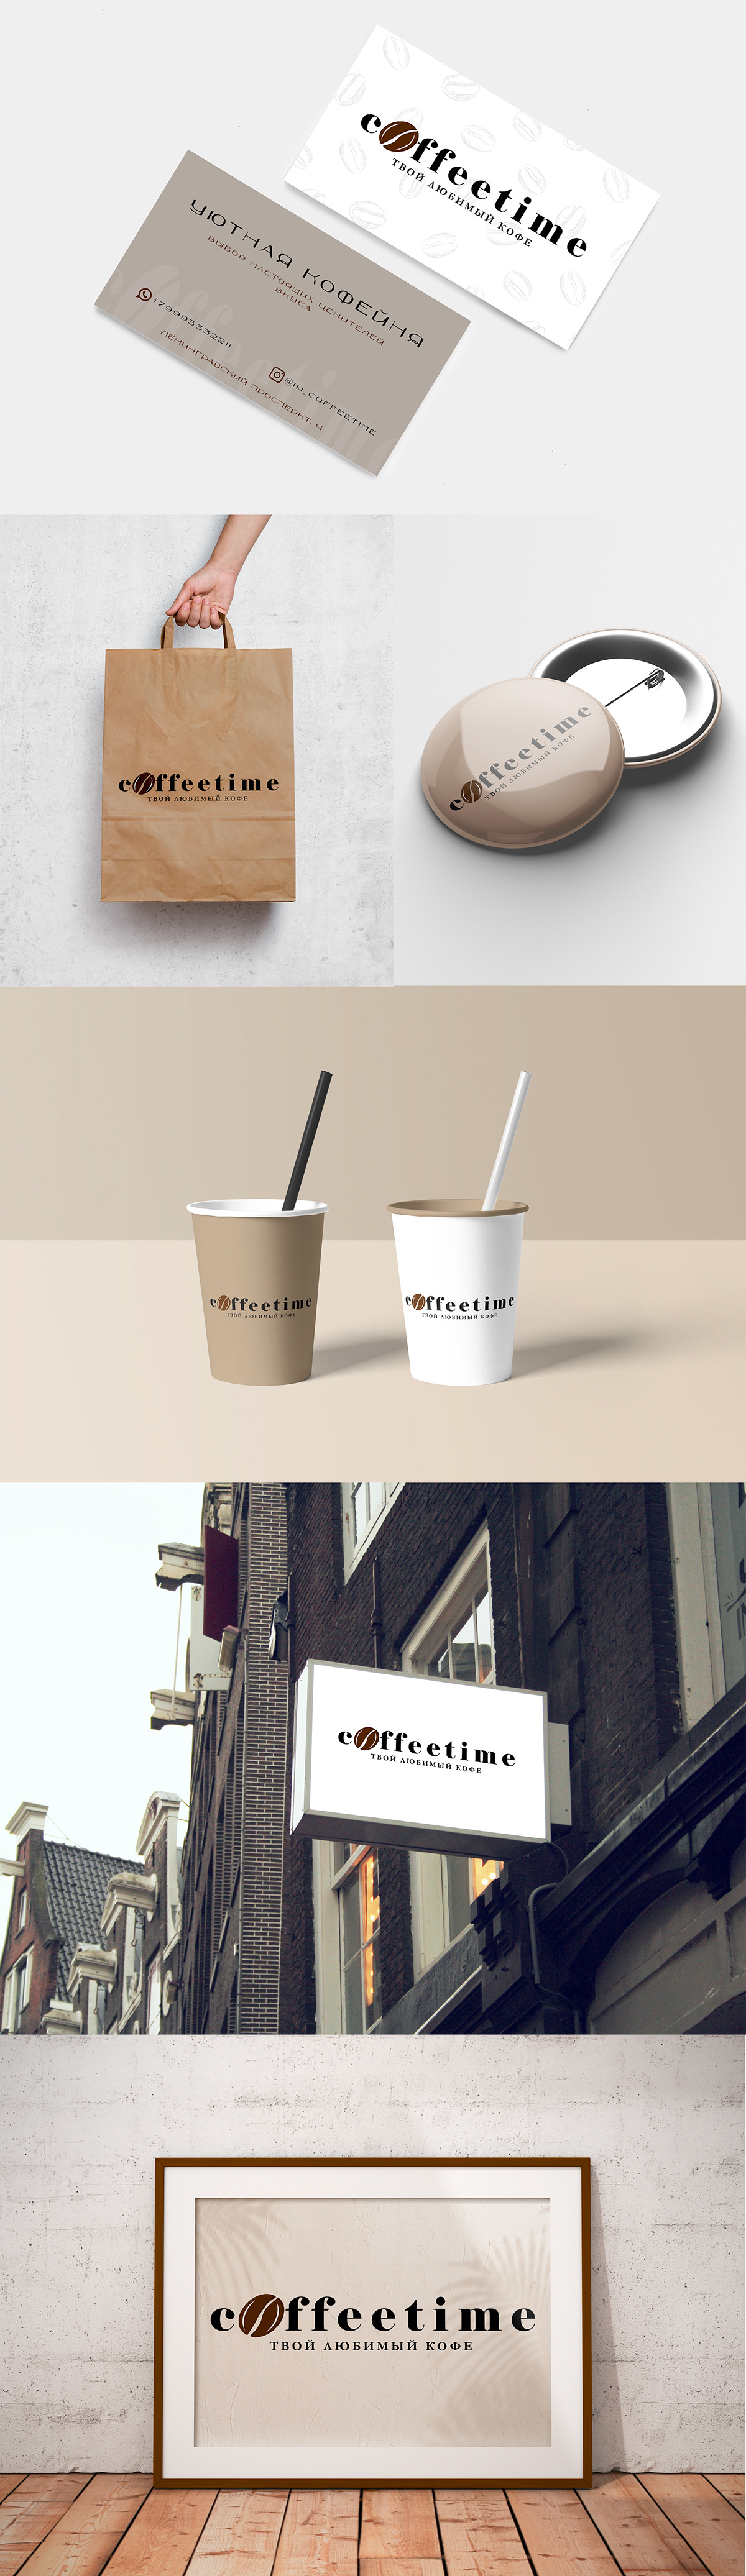 Brand design for a small but very cozy coffee shop with amazing coffee
